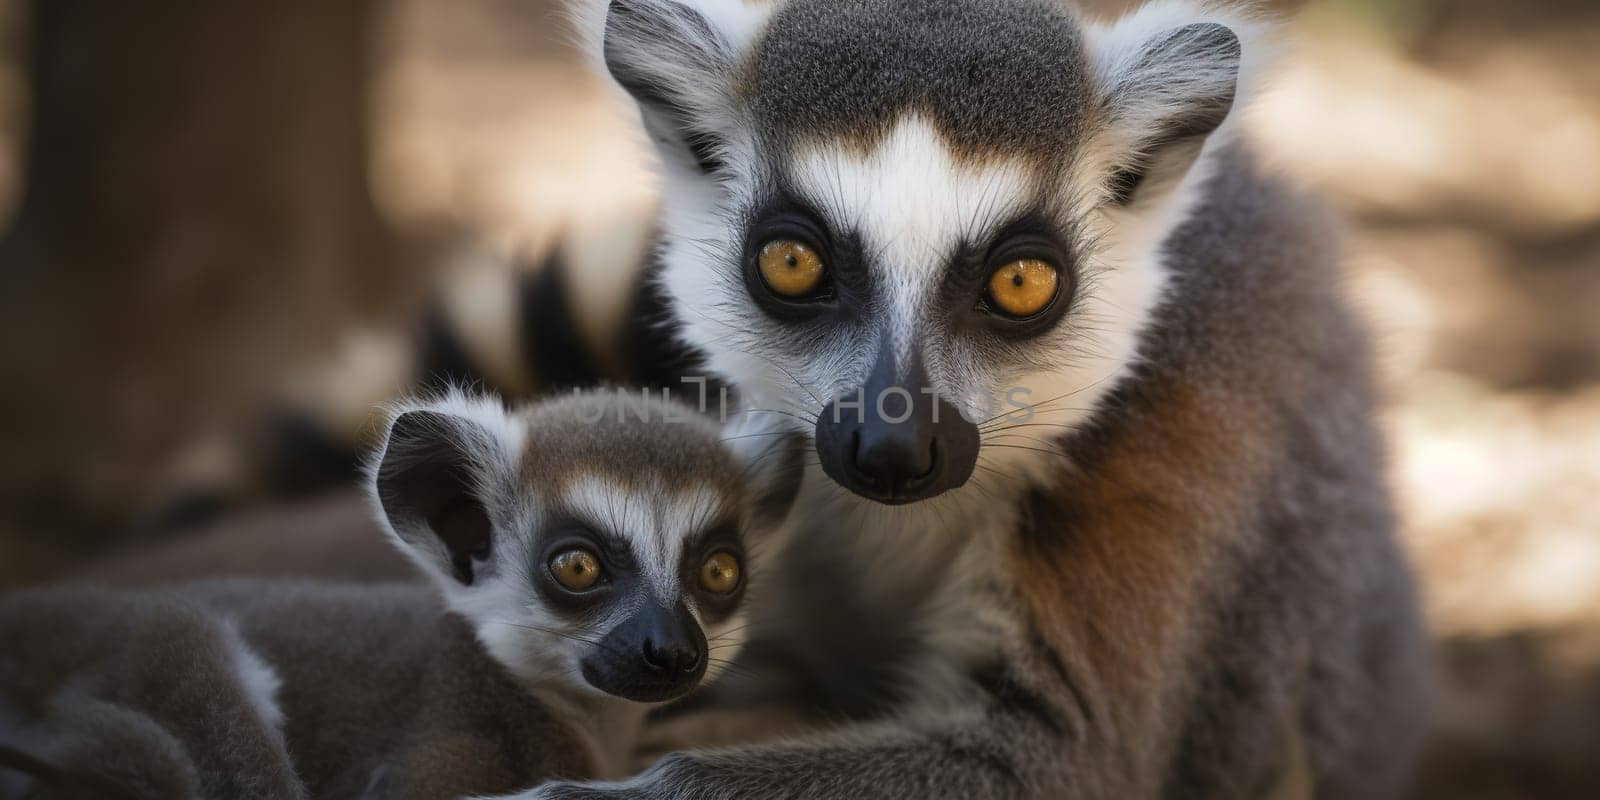 Adult lemur with baby looking at camera in the forest by tan4ikk1